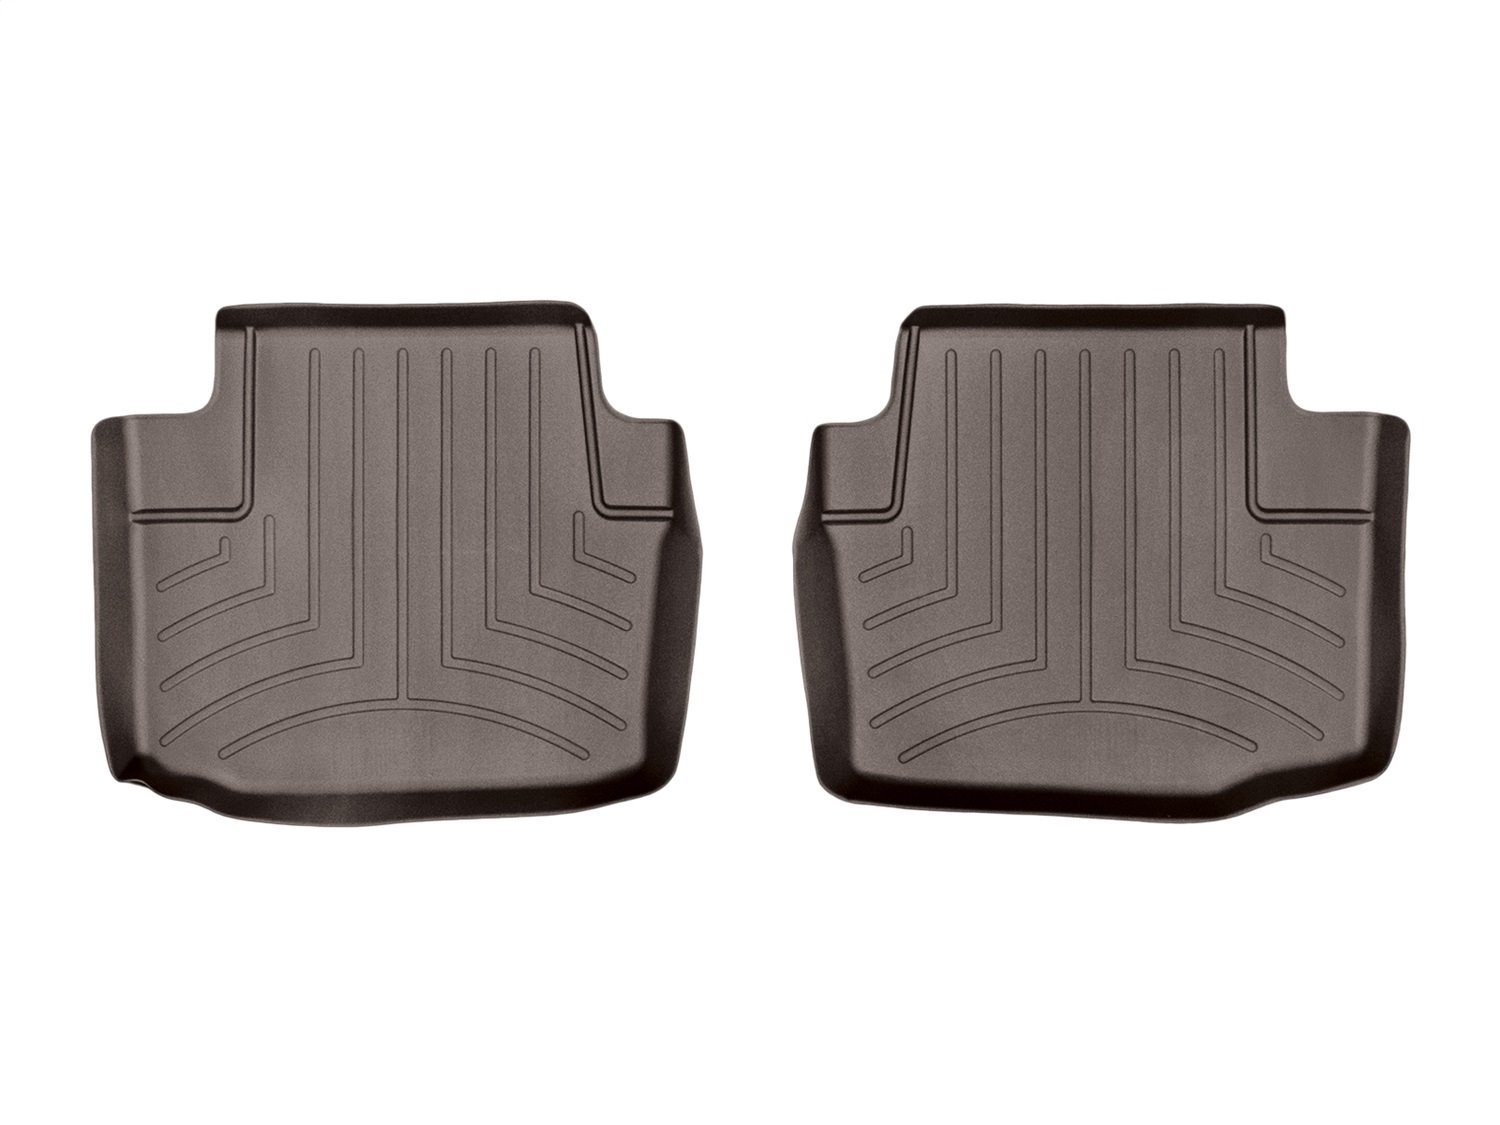 REAR FLOORLINER COCOA CADILLAC CTS/CTS-V 2015-2017 FITS SEDAN ONLY